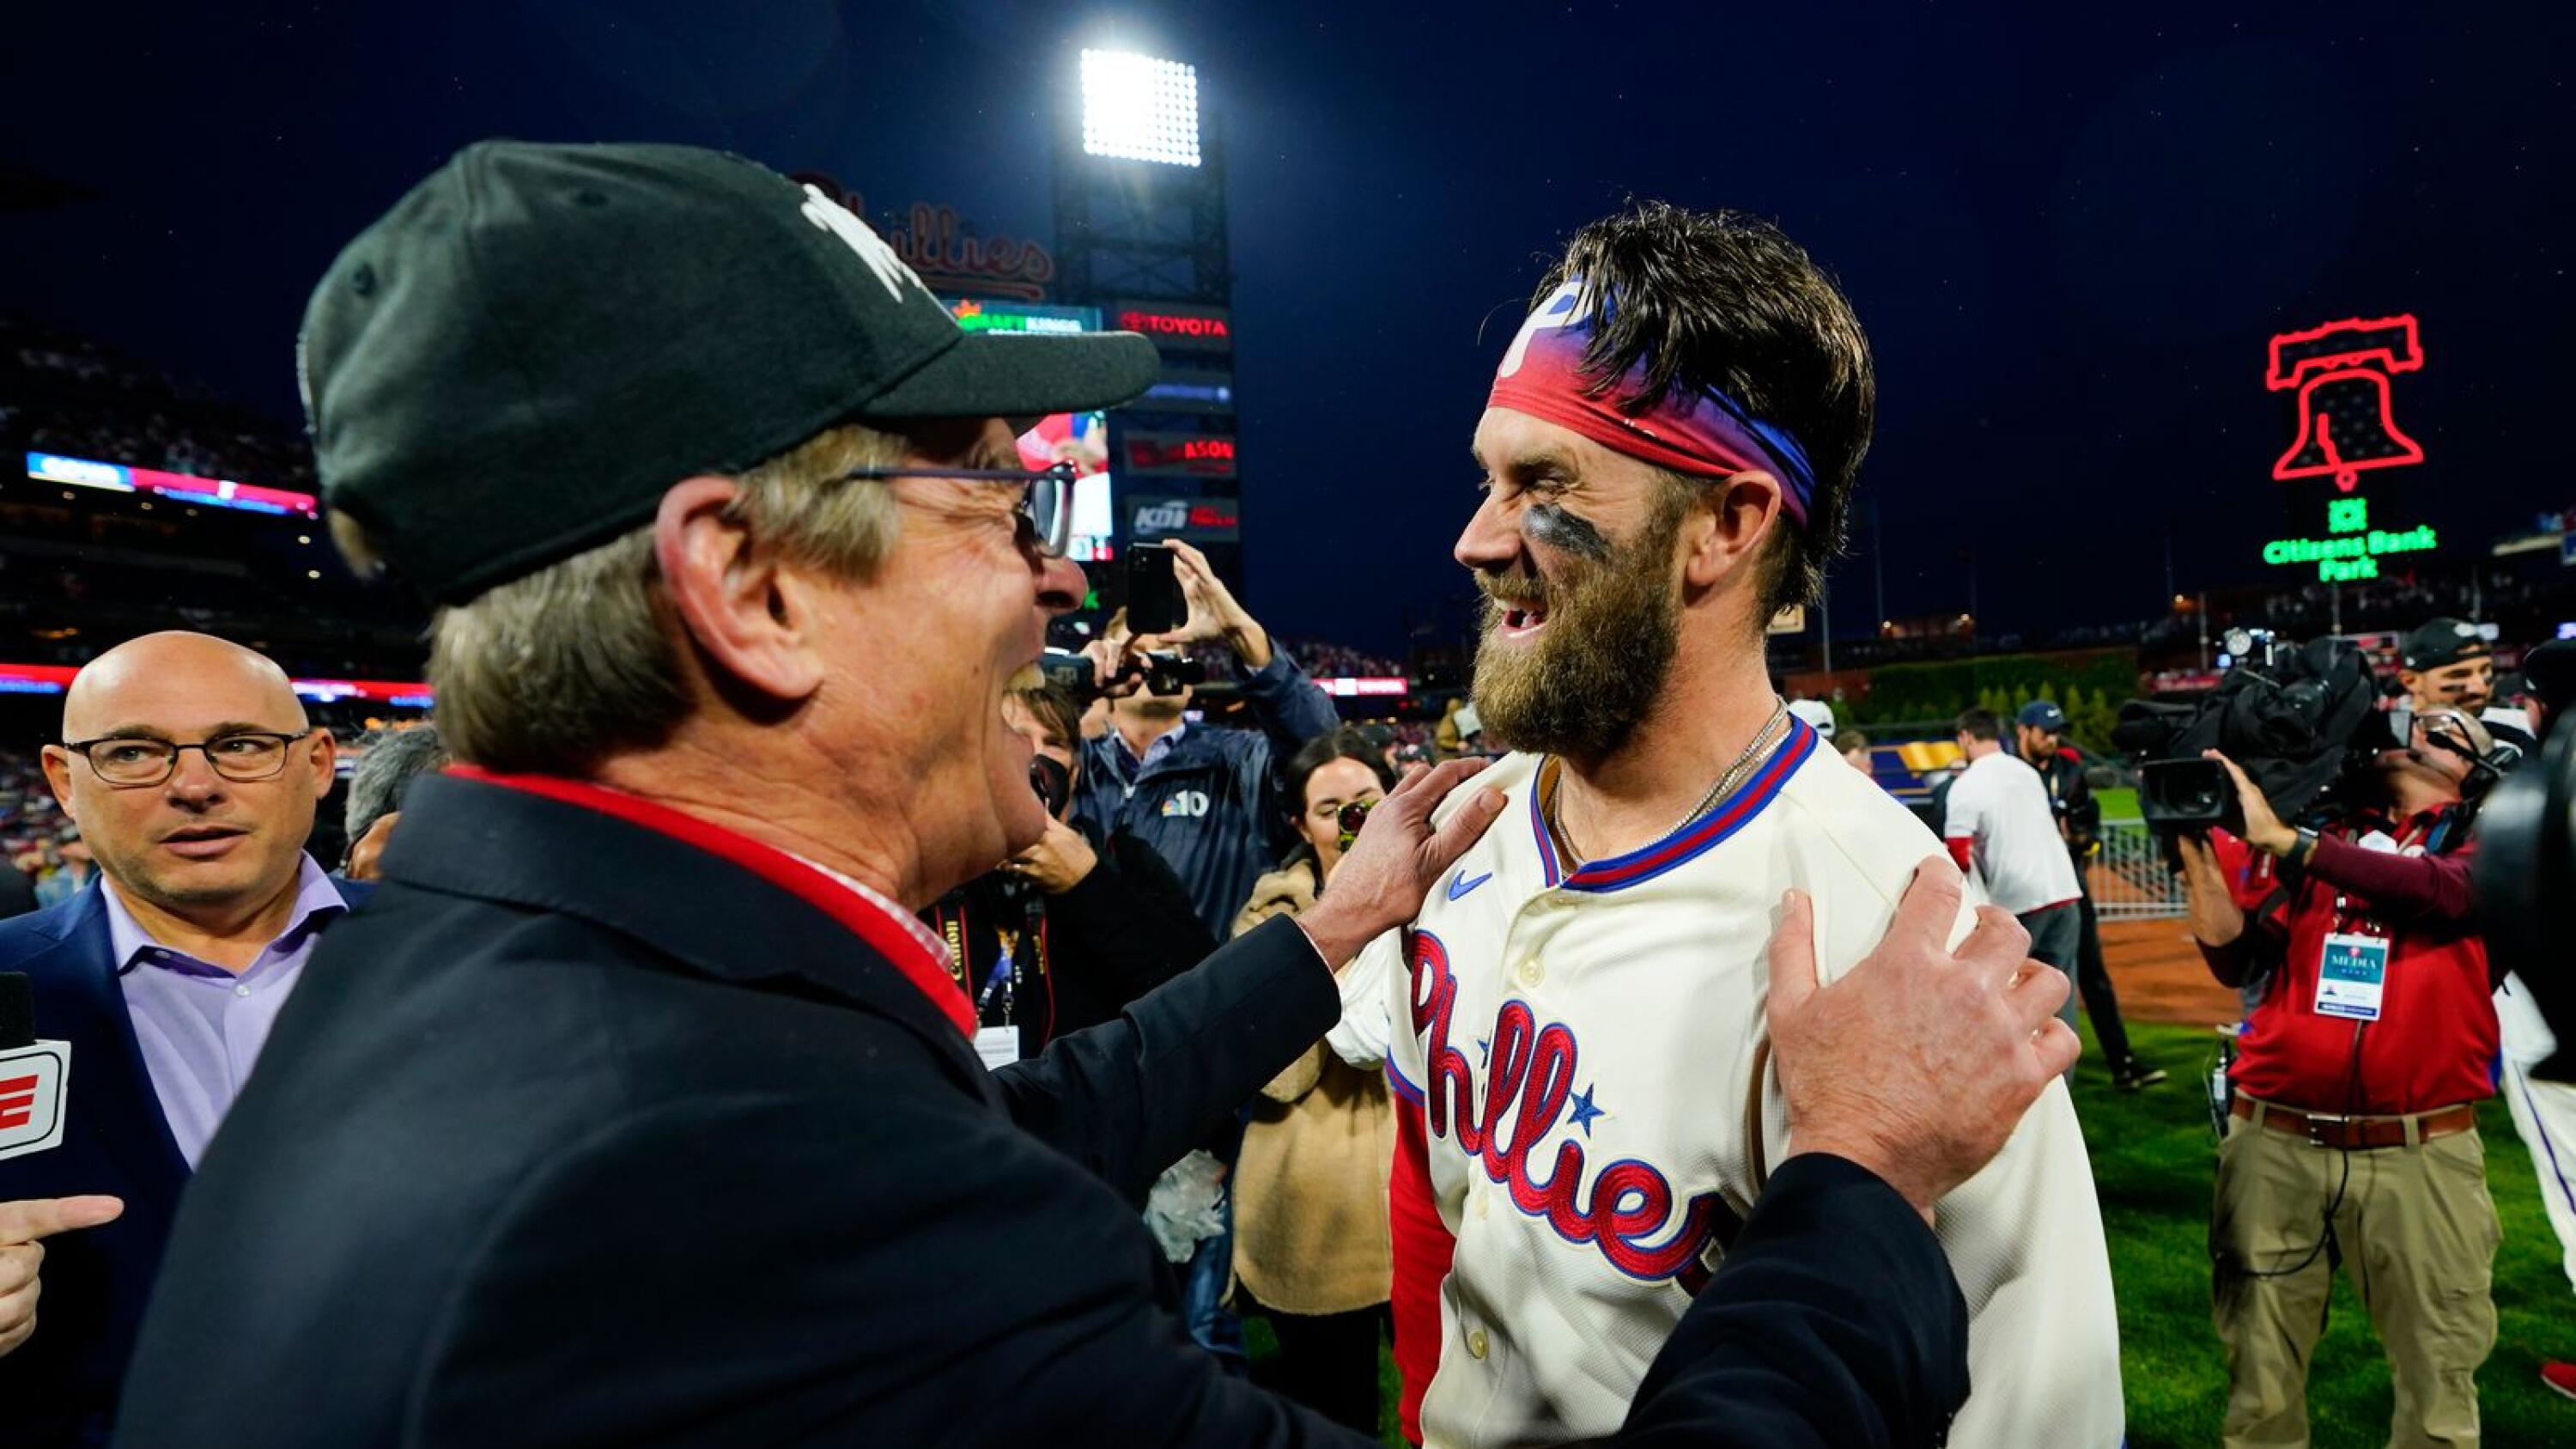 Phillies to the World Series for first time since 2009 - Axios